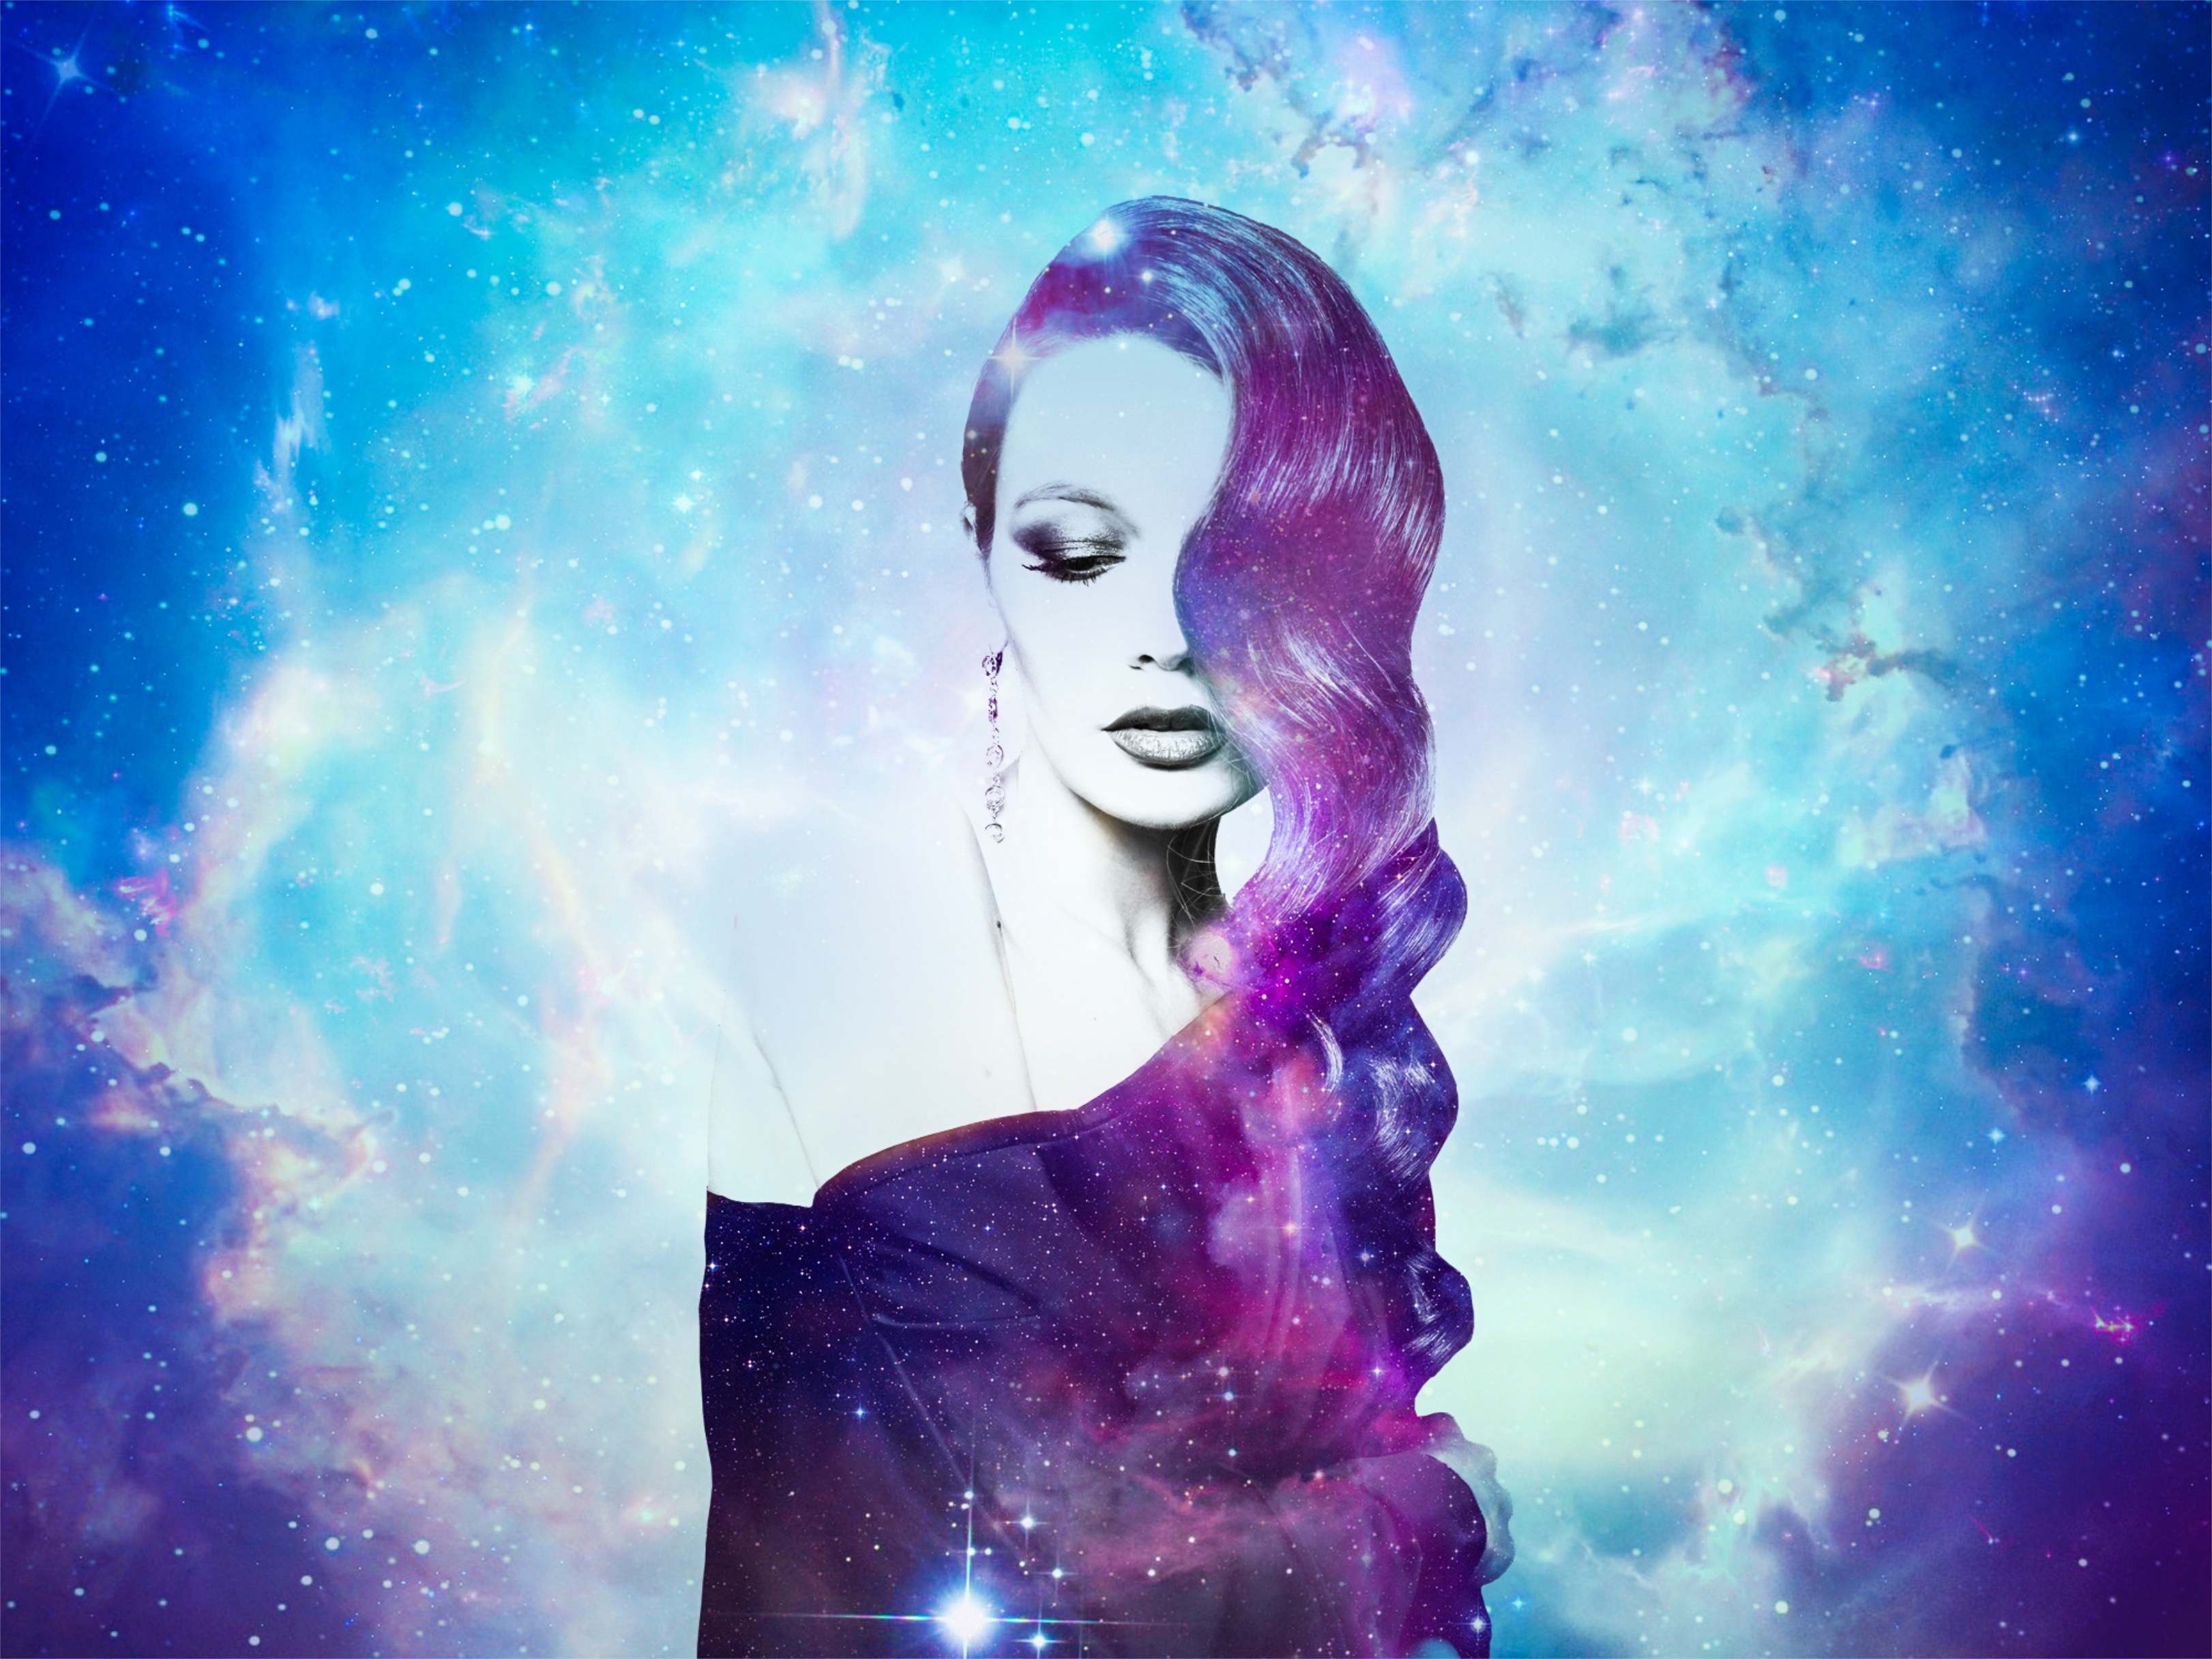 91537 Screensavers and Wallpapers Cosmic for phone. Download art, galaxy, girl, space, cosmic, photo manipulation pictures for free